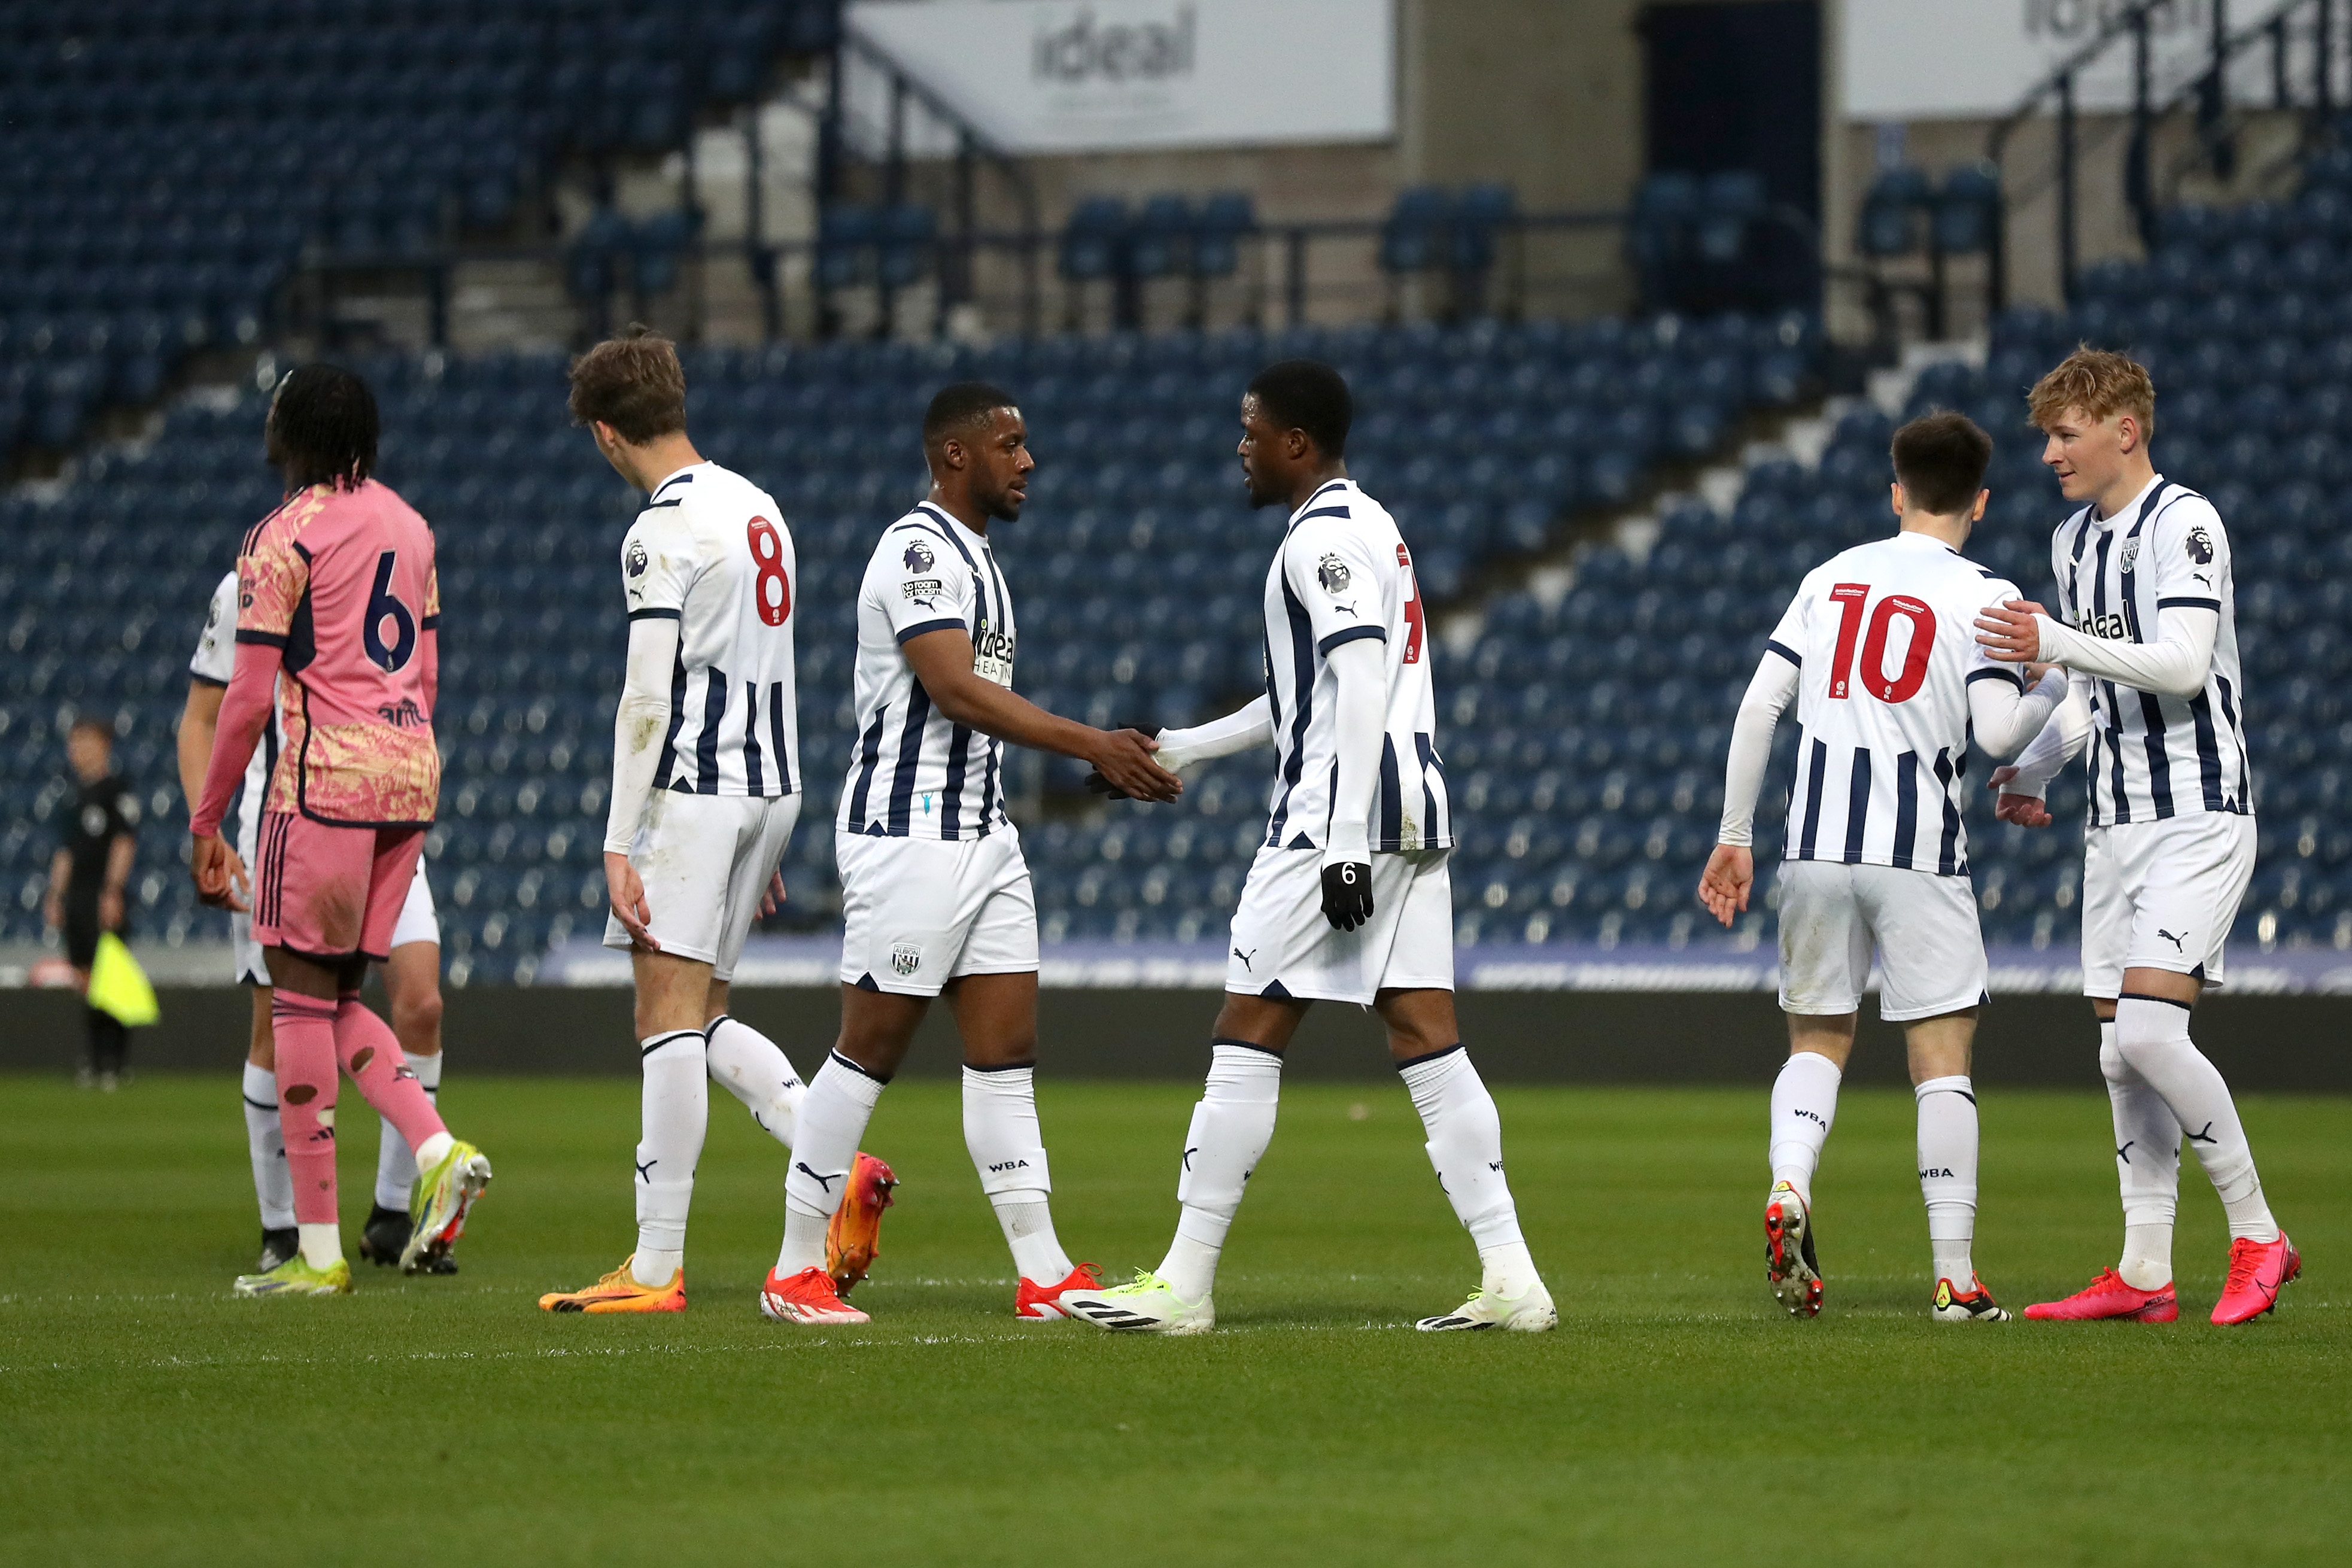 Albion players celebrate scoring a goal against Leeds in the PL2 clash at The Hawthorns 